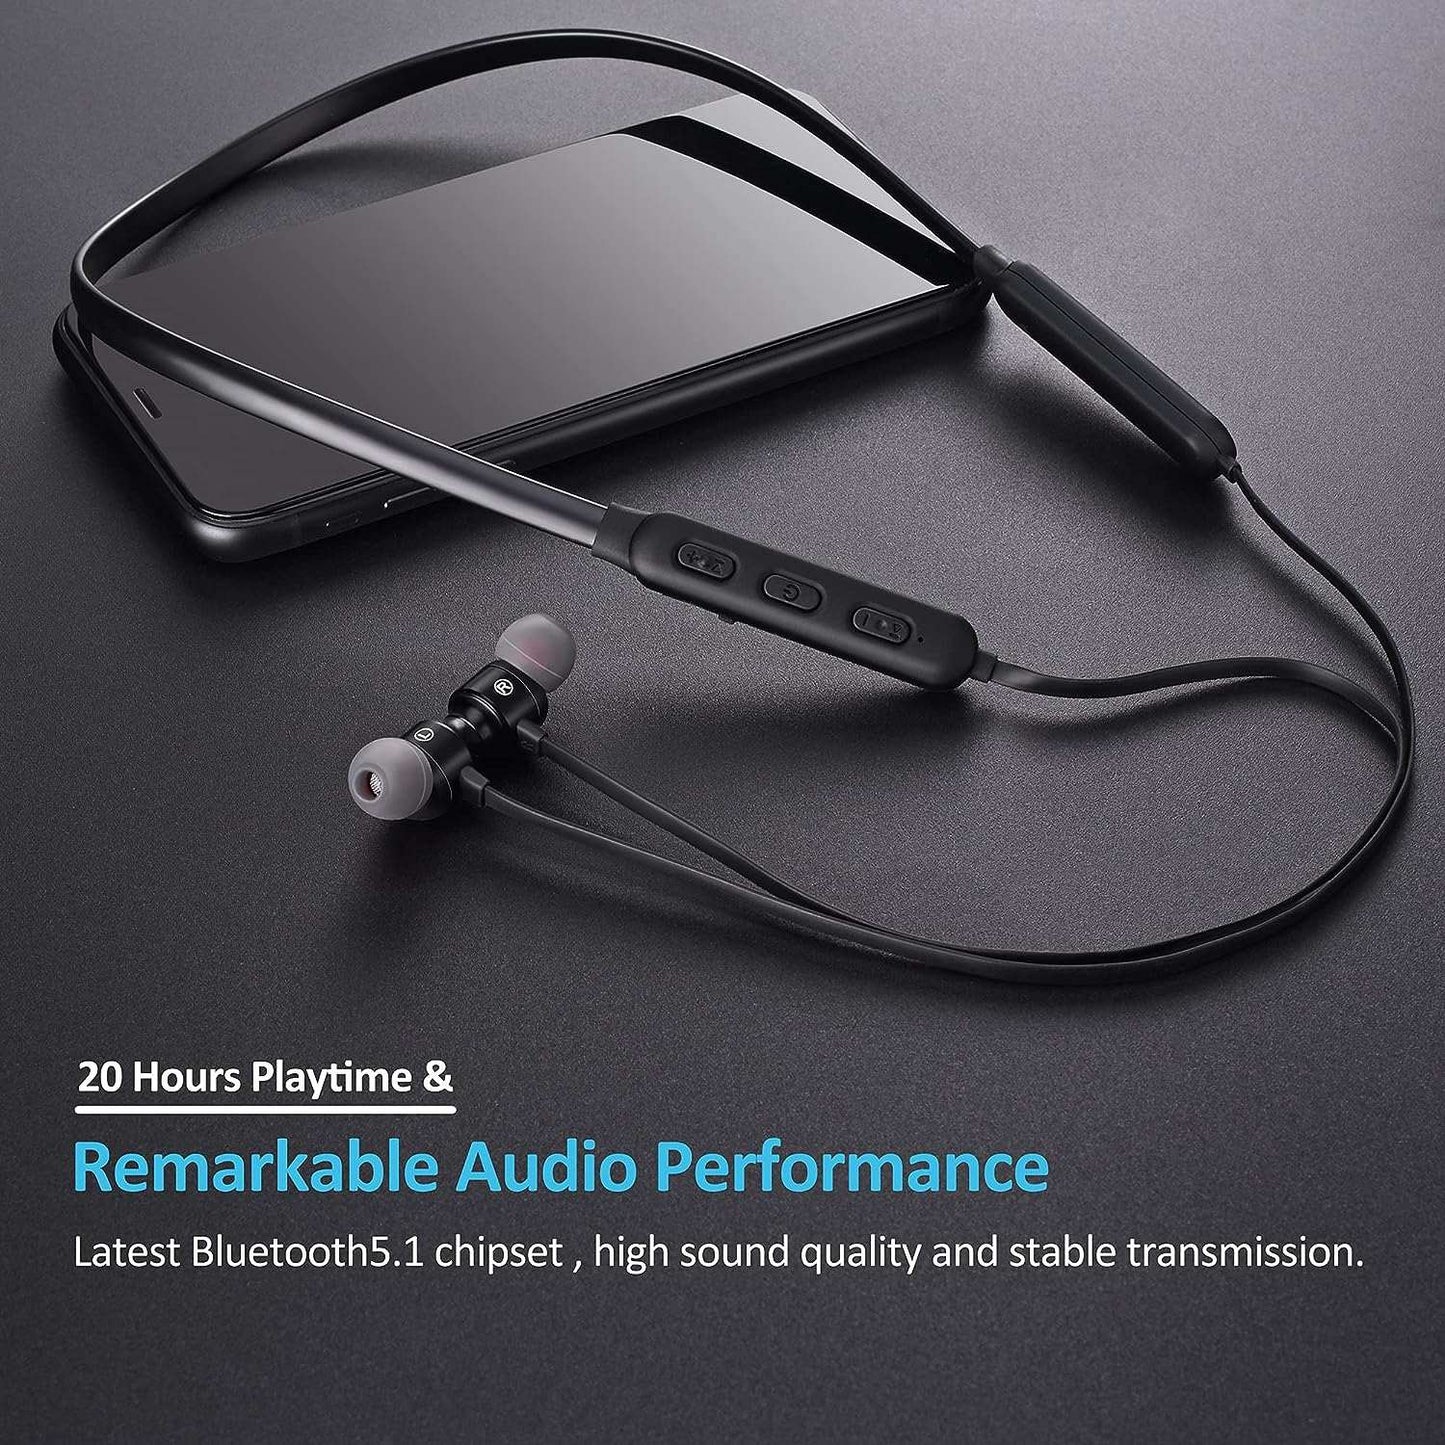 Bluetooth Headphones v5.1Listen up and enjoy your favorite tunes - wirelessly! These Bluetooth Headphones v5.1 have got you covered with their magnetic neckband earbuds, HD sound, stereo basindoorTOPDEALTOPDEALBluetooth Headphones v5